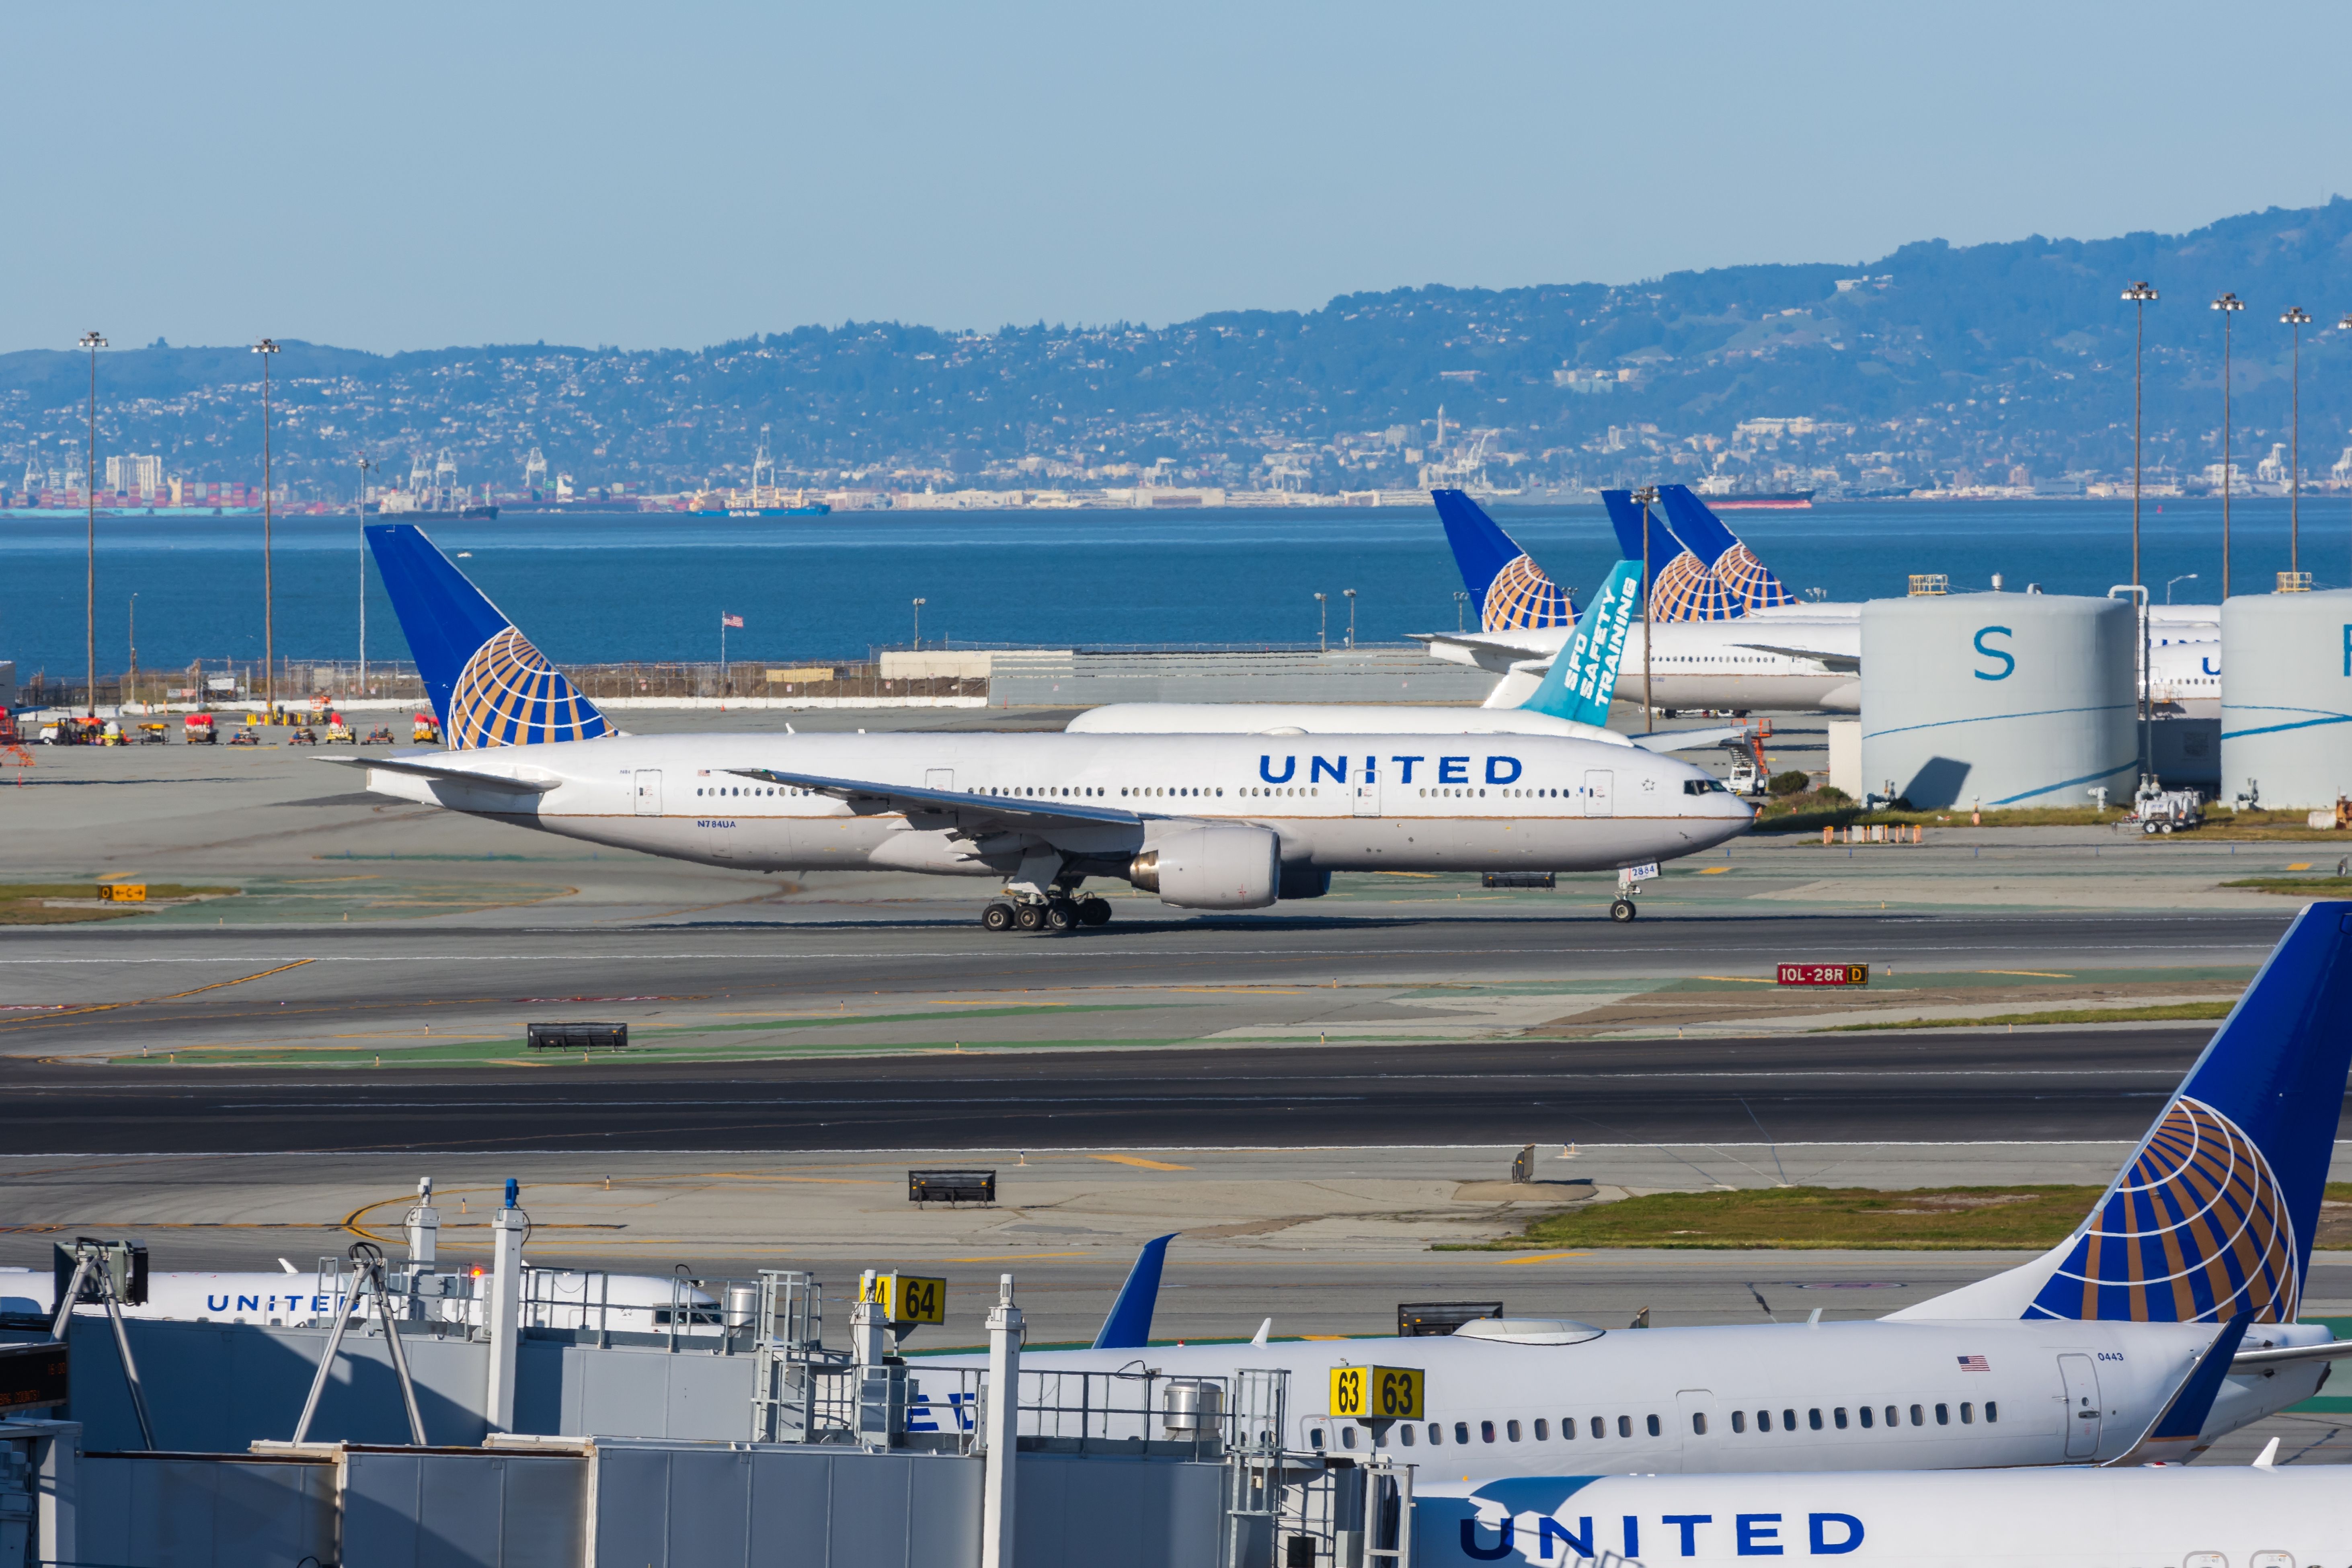 Multiple United Airlines aircraft in San Francisco.